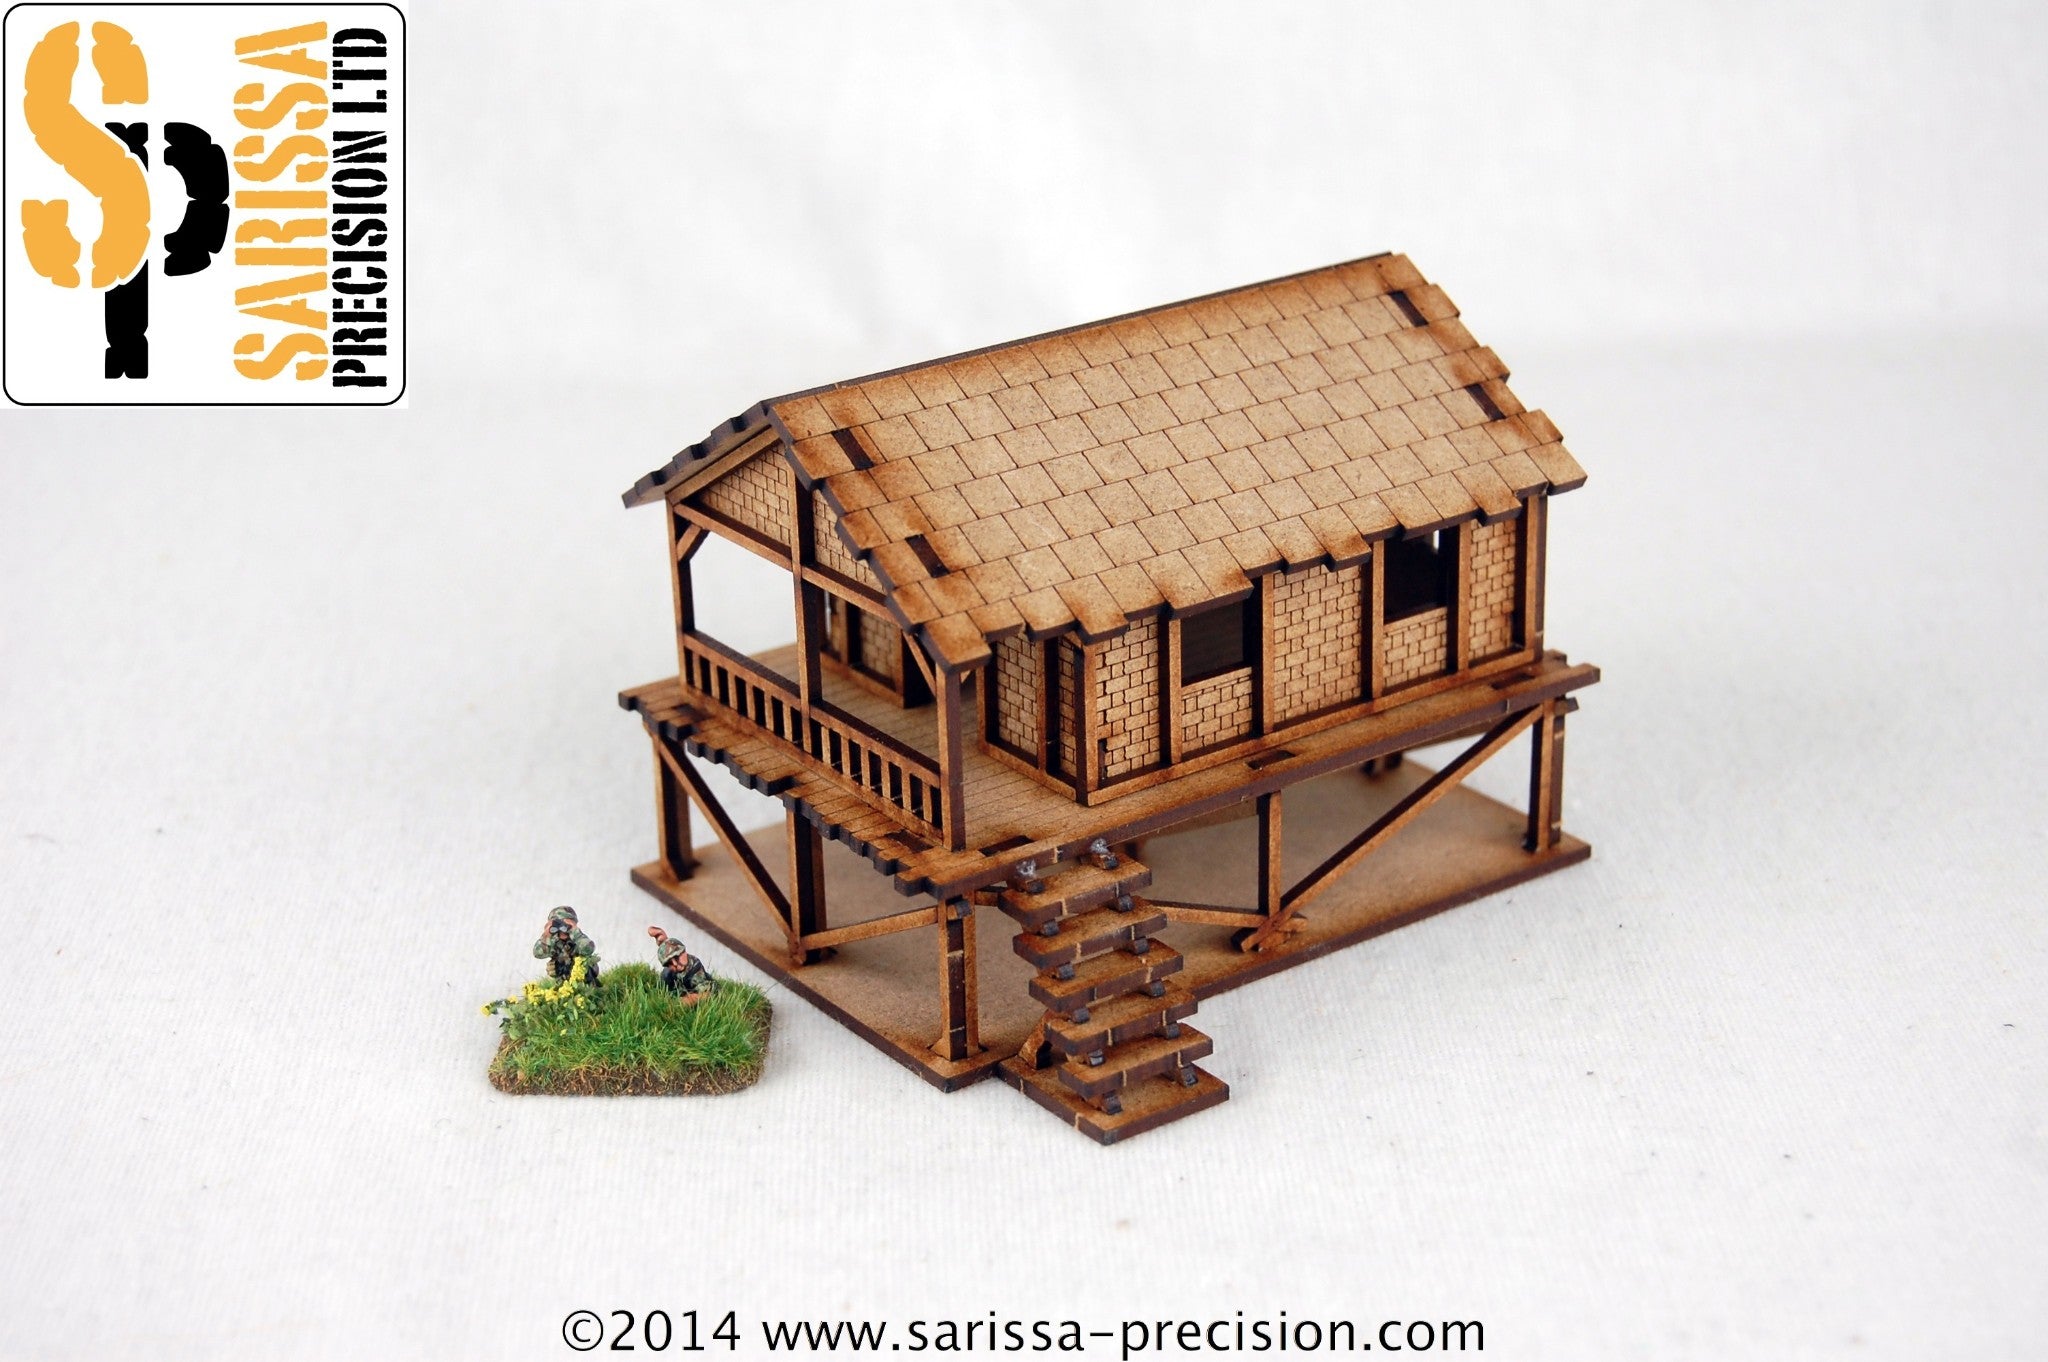 Woven Palm-Style Village House - 15mm